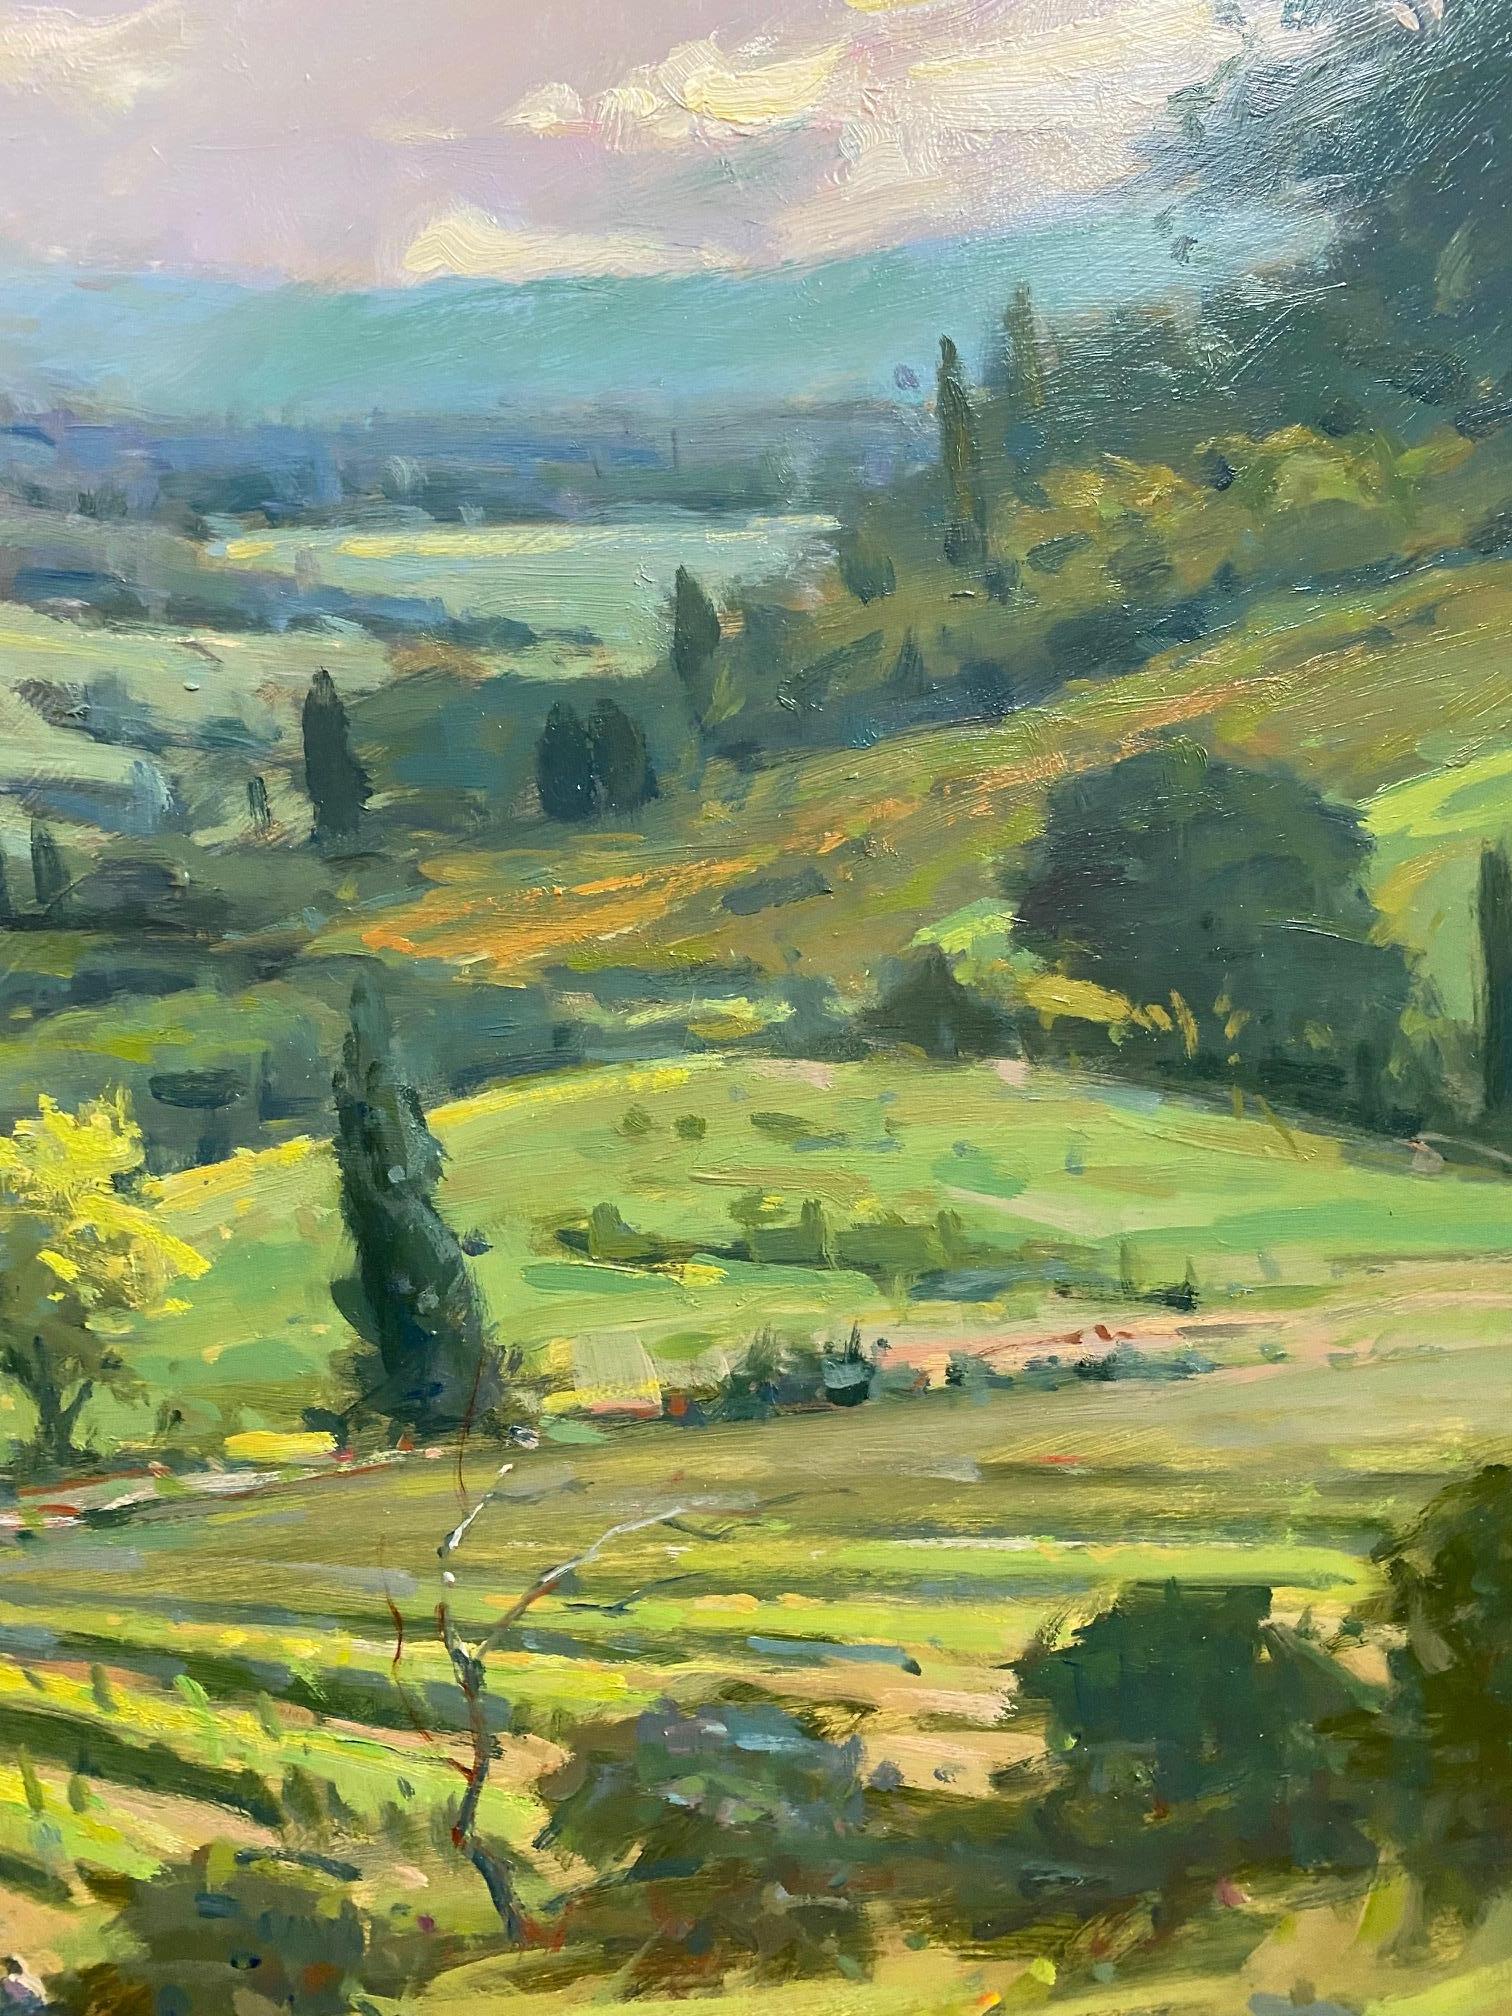 The inviting warmth, history and beauty of the Chianti region of Italy  is recreated by master impressionist Jim Rodgers.  After numerous visits to the Italian vineyards of Tuscany, Umbria and others in northern and central Italy, Rodgers has